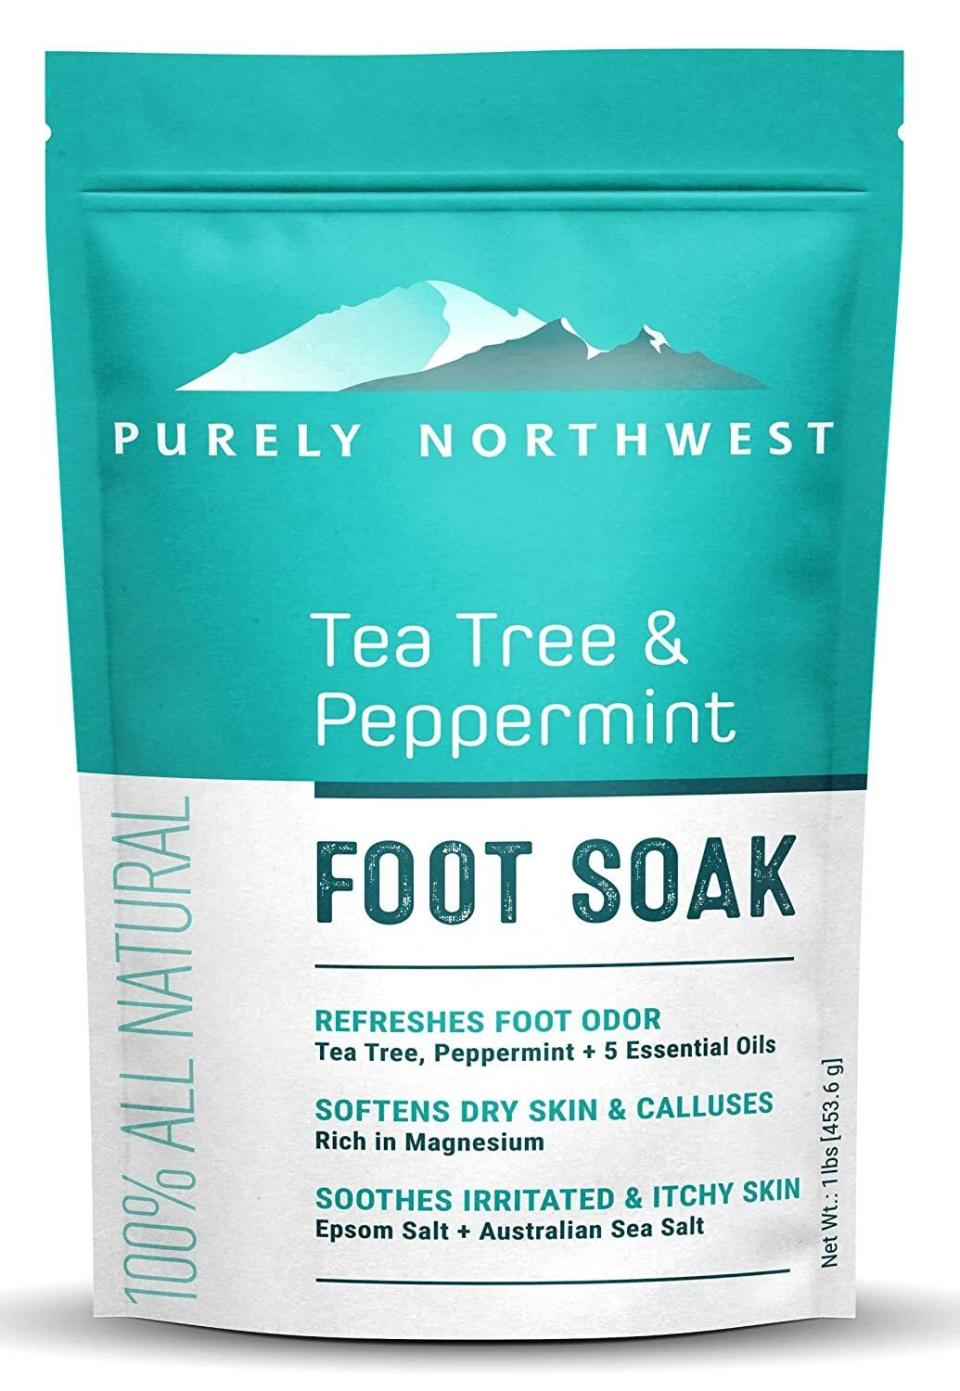 After you give your nails a trim, Austin recommends soaking your feet for 3-5 minutes in warm water to soften your cuticles, making it easier (and less hangnail-inducing) to push them if you prefer to do so. If you want to upgrade your foot soak, you can opt for an Epsom salt bath like this tea tree and peppermint version that's specifically made for feet.You can buy the tea tree oil and peppermint foot soak from Amazon for around $16. 